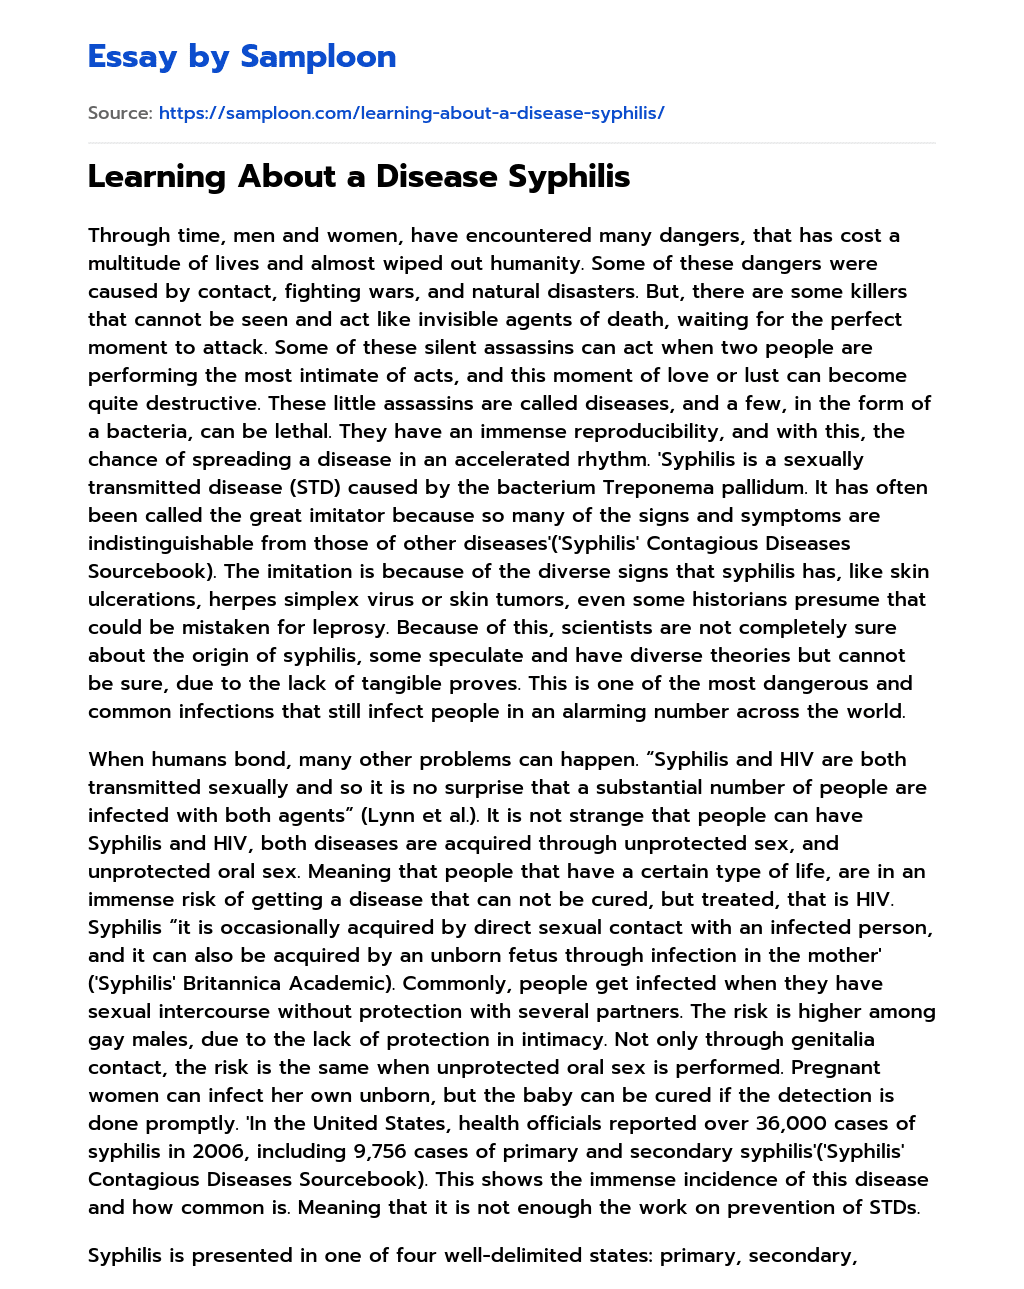 Learning About a Disease Syphilis essay